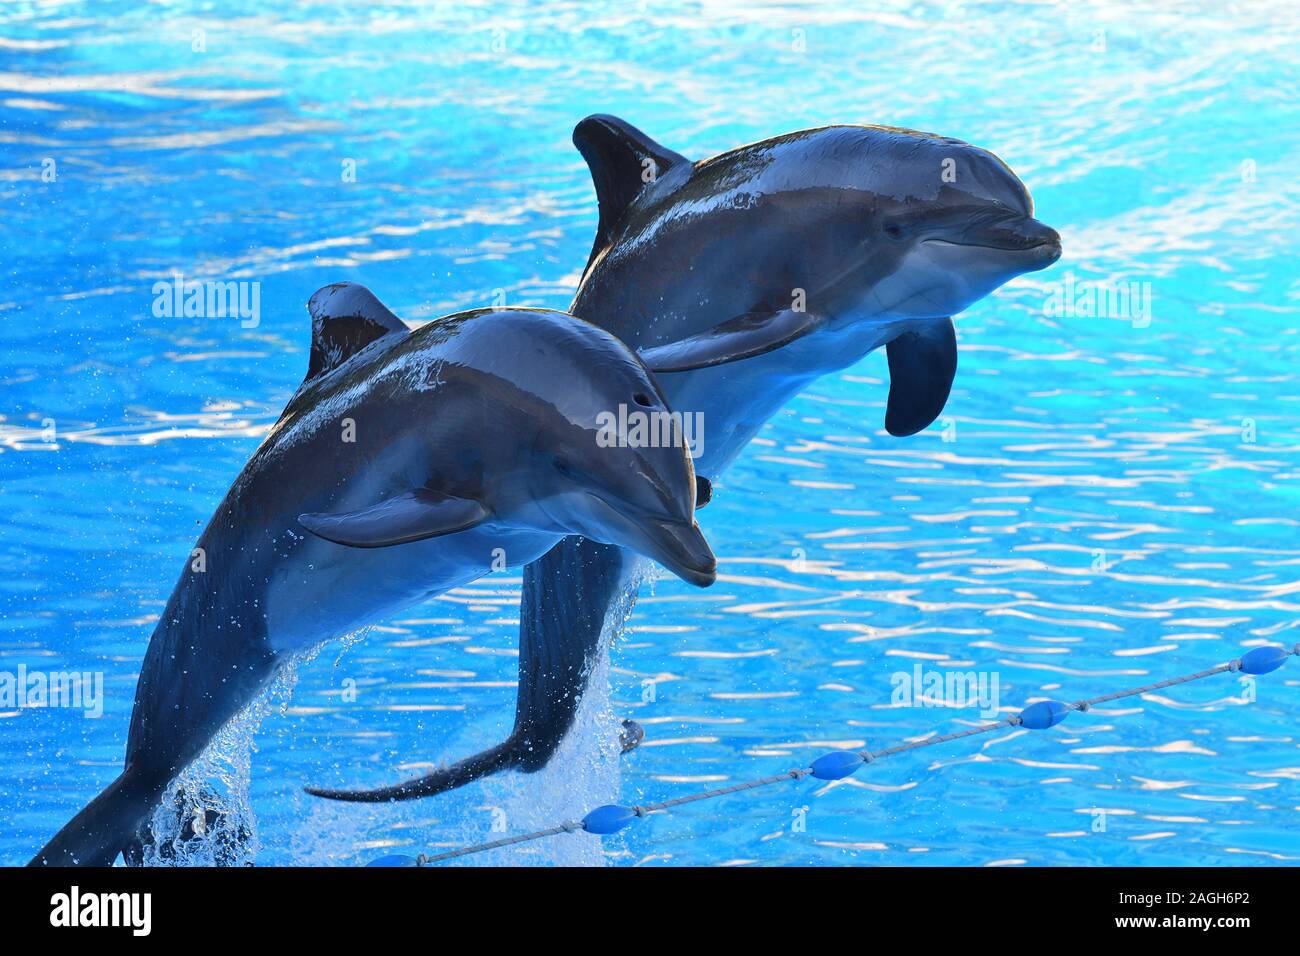 Two dolphins jumping out of the water during a dolphin show Stock Photo